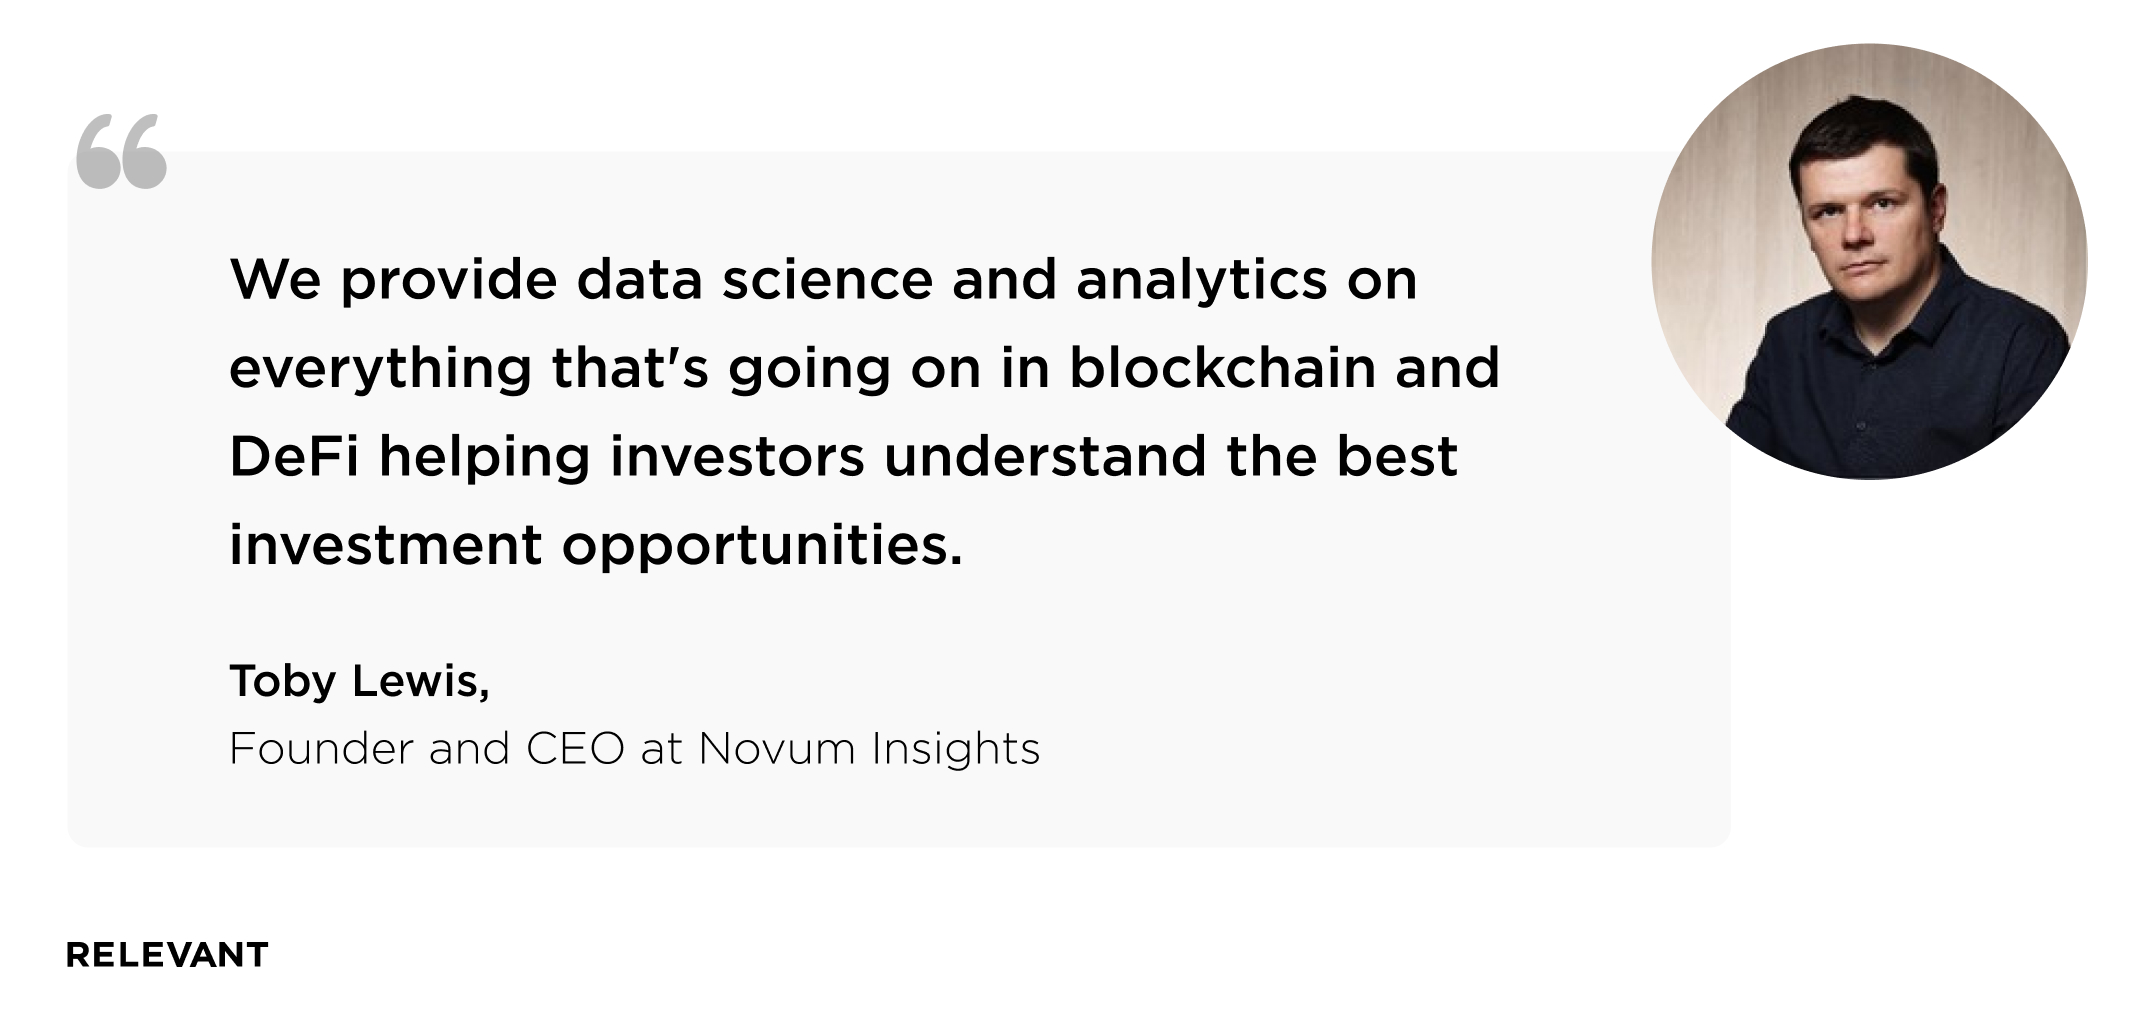 Toby Lewis founder, and CEO at Novum Insight